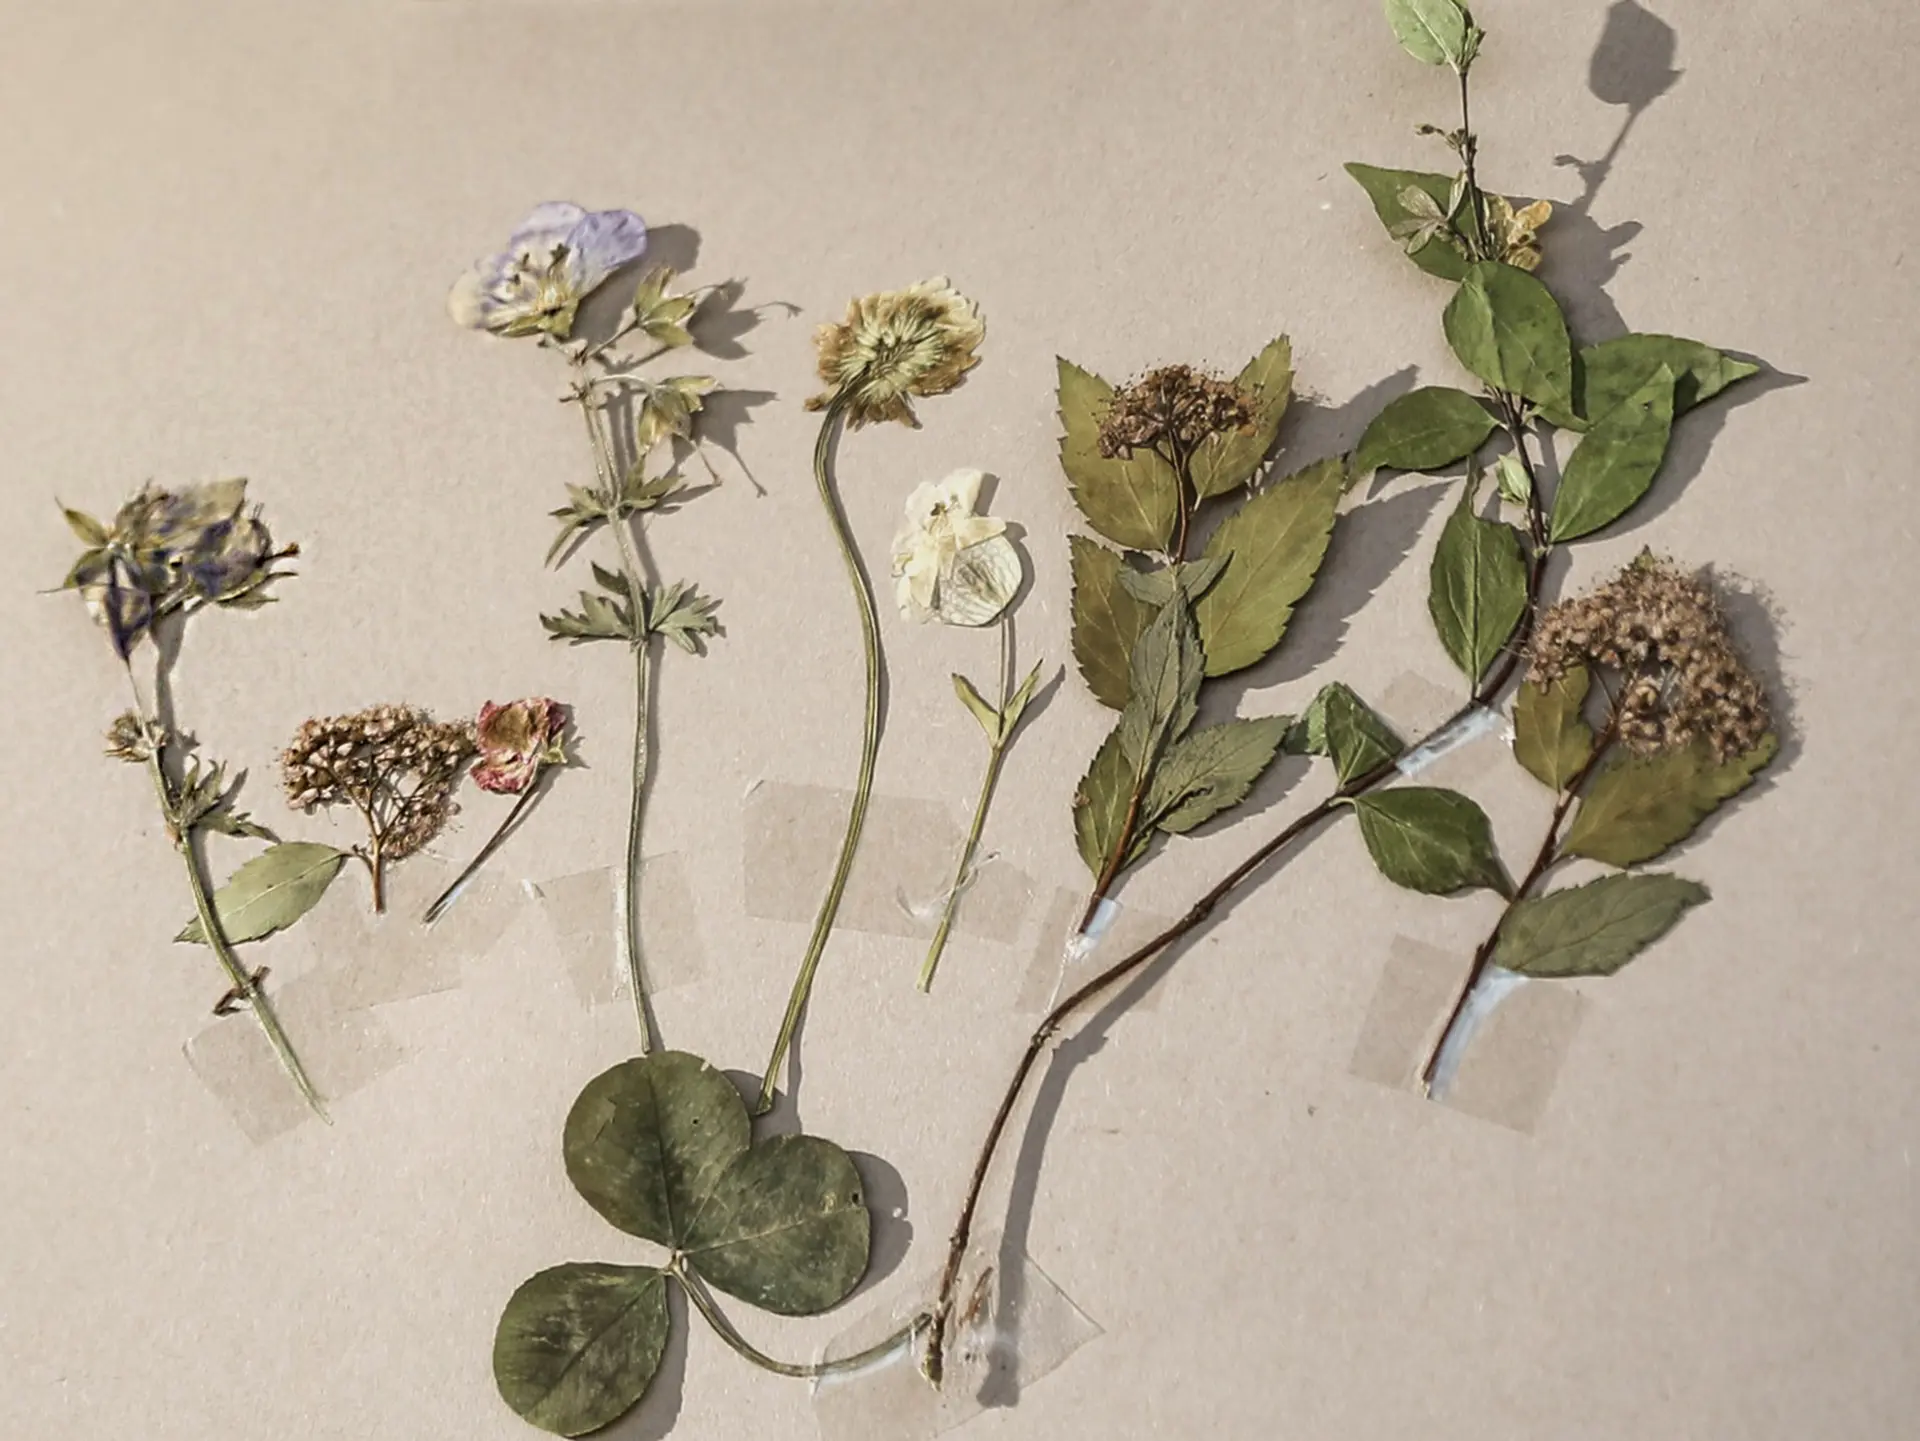 Wild flowers kept for Amy Pressed dried flowers and leaves are sellotaped to a piece of paper